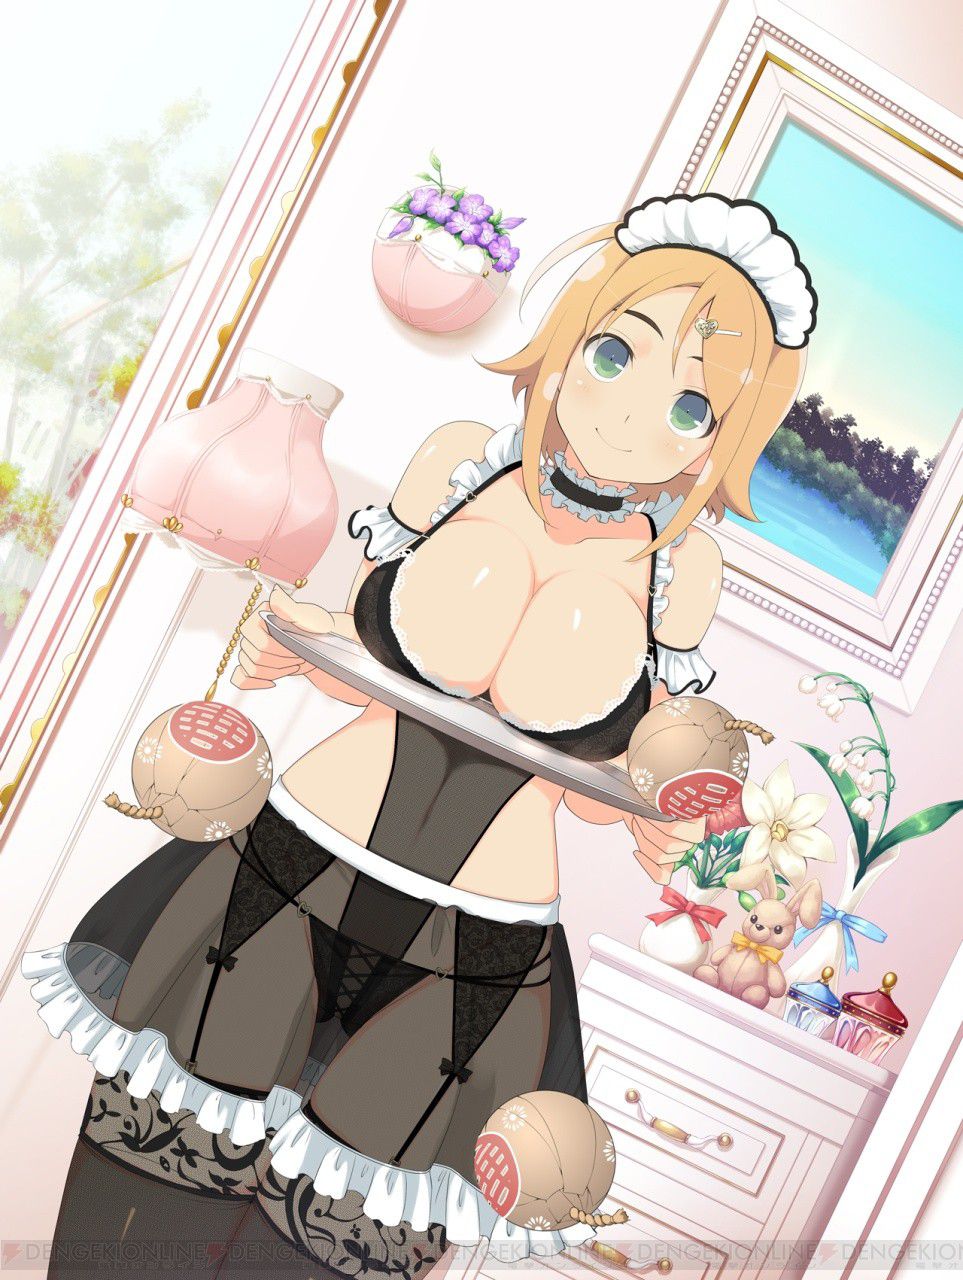 [Senran Kagura] [best PIE Championship] is held! Popular character vote is determined by the size of the breast! 25